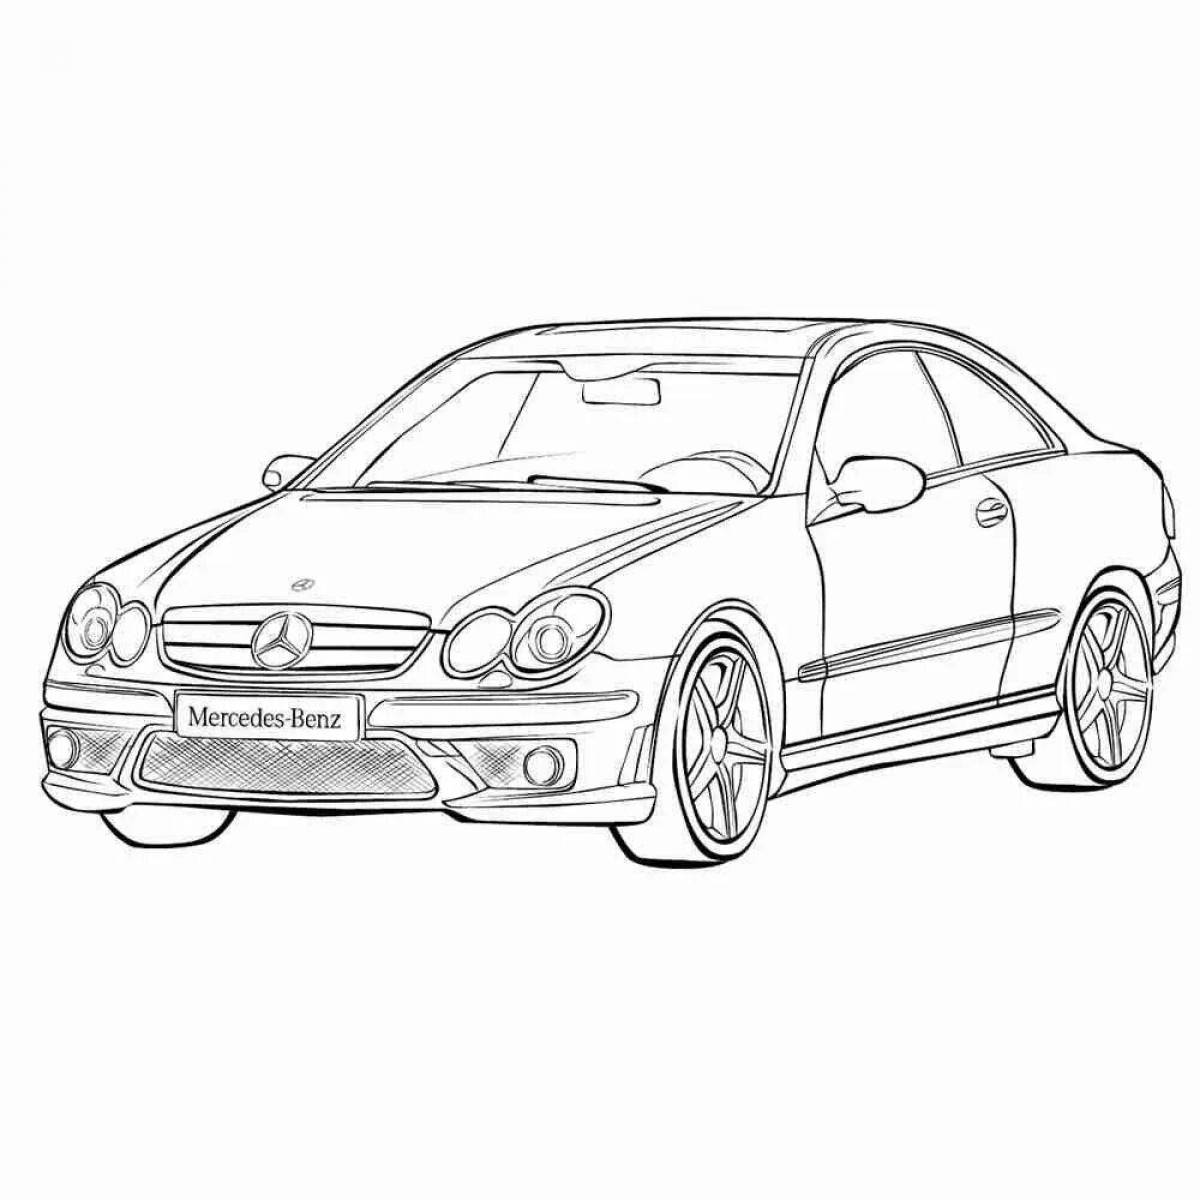 Perfect racing mercedes coloring page